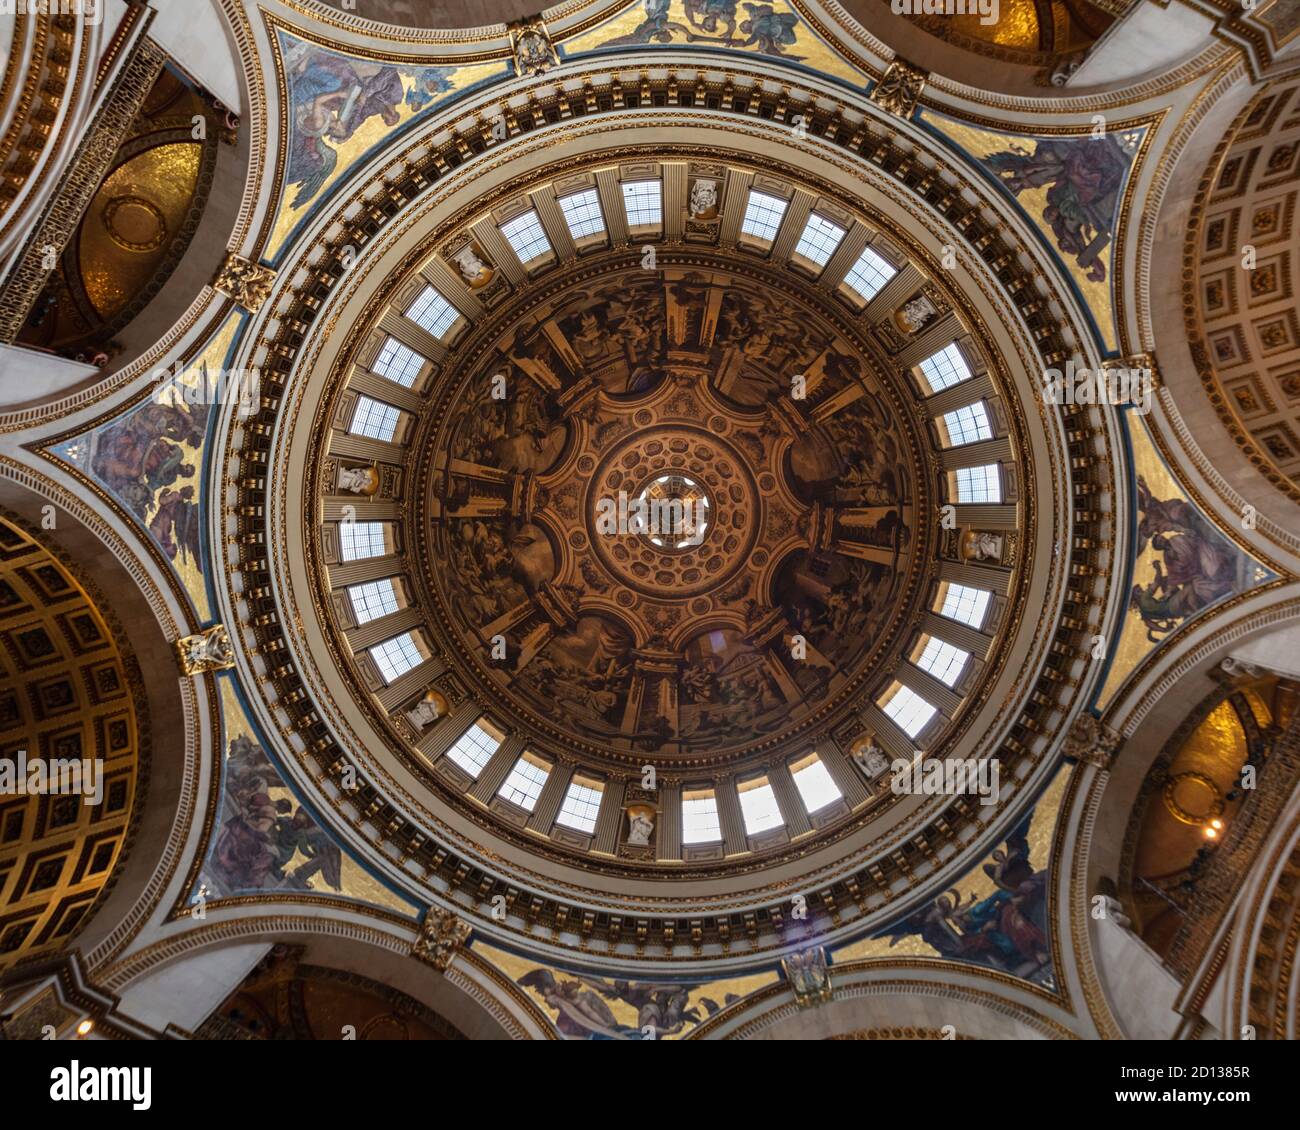 London, UK. The painted dome by James Thornhill in the interior of St. Paul's Cathedral, designed by Sir Christopher Wren Stock Photo